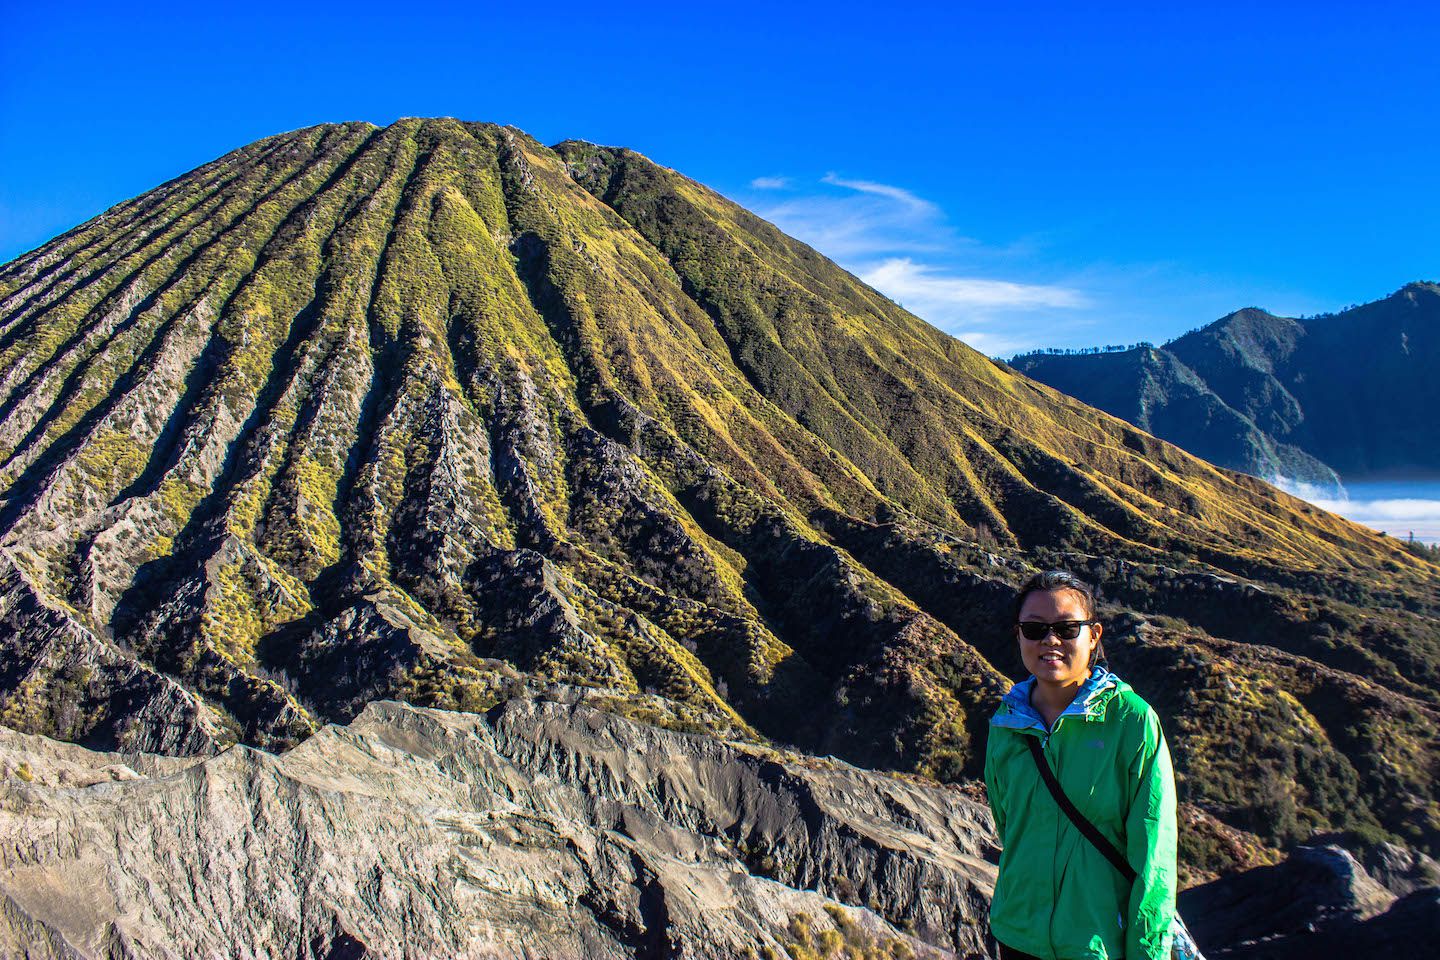 Julie trekking up to the crater of Mt. Bromo, Indonesia